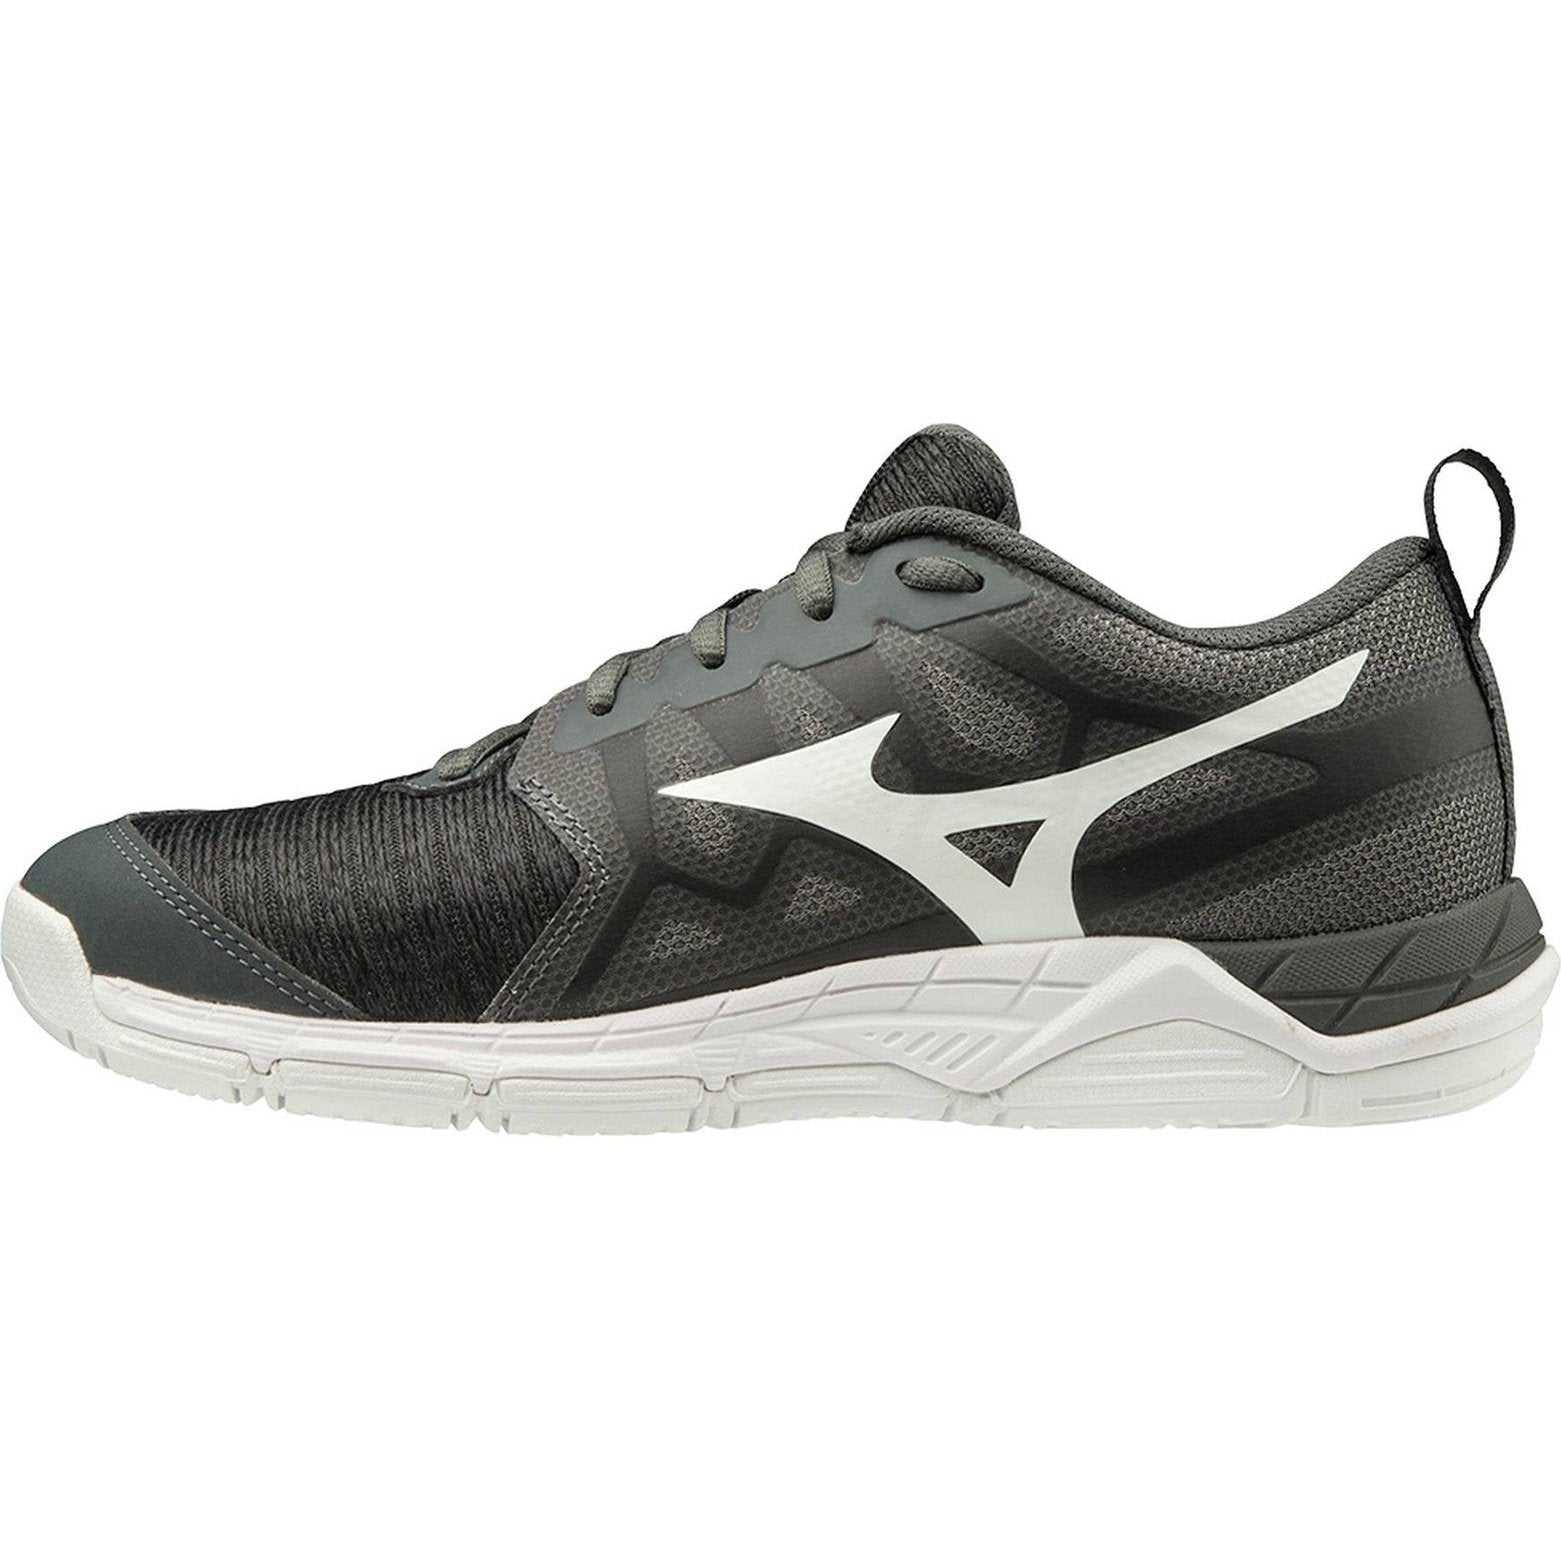 Mizuno Wave Supersonic 2 Women's Volleyball Shoe 430288 - Black Charcoal - HIT a Double